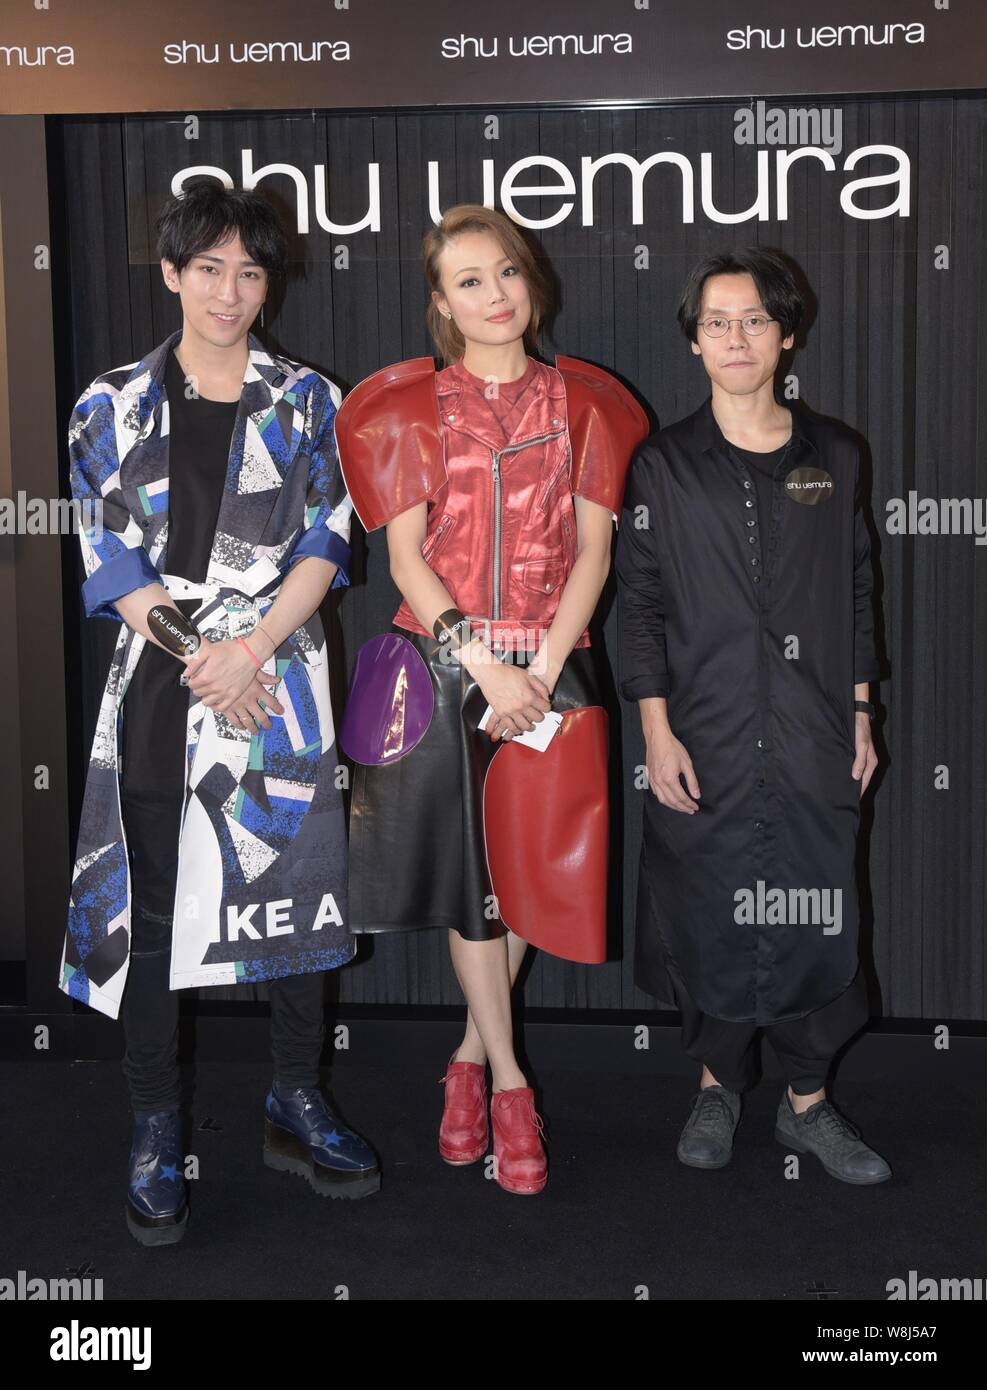 Hong Kong singer Joey Yung, center, attends a promotional event for Shu Uemura cosmetics in Hong Kong, China, 16 March 2015. Stock Photo